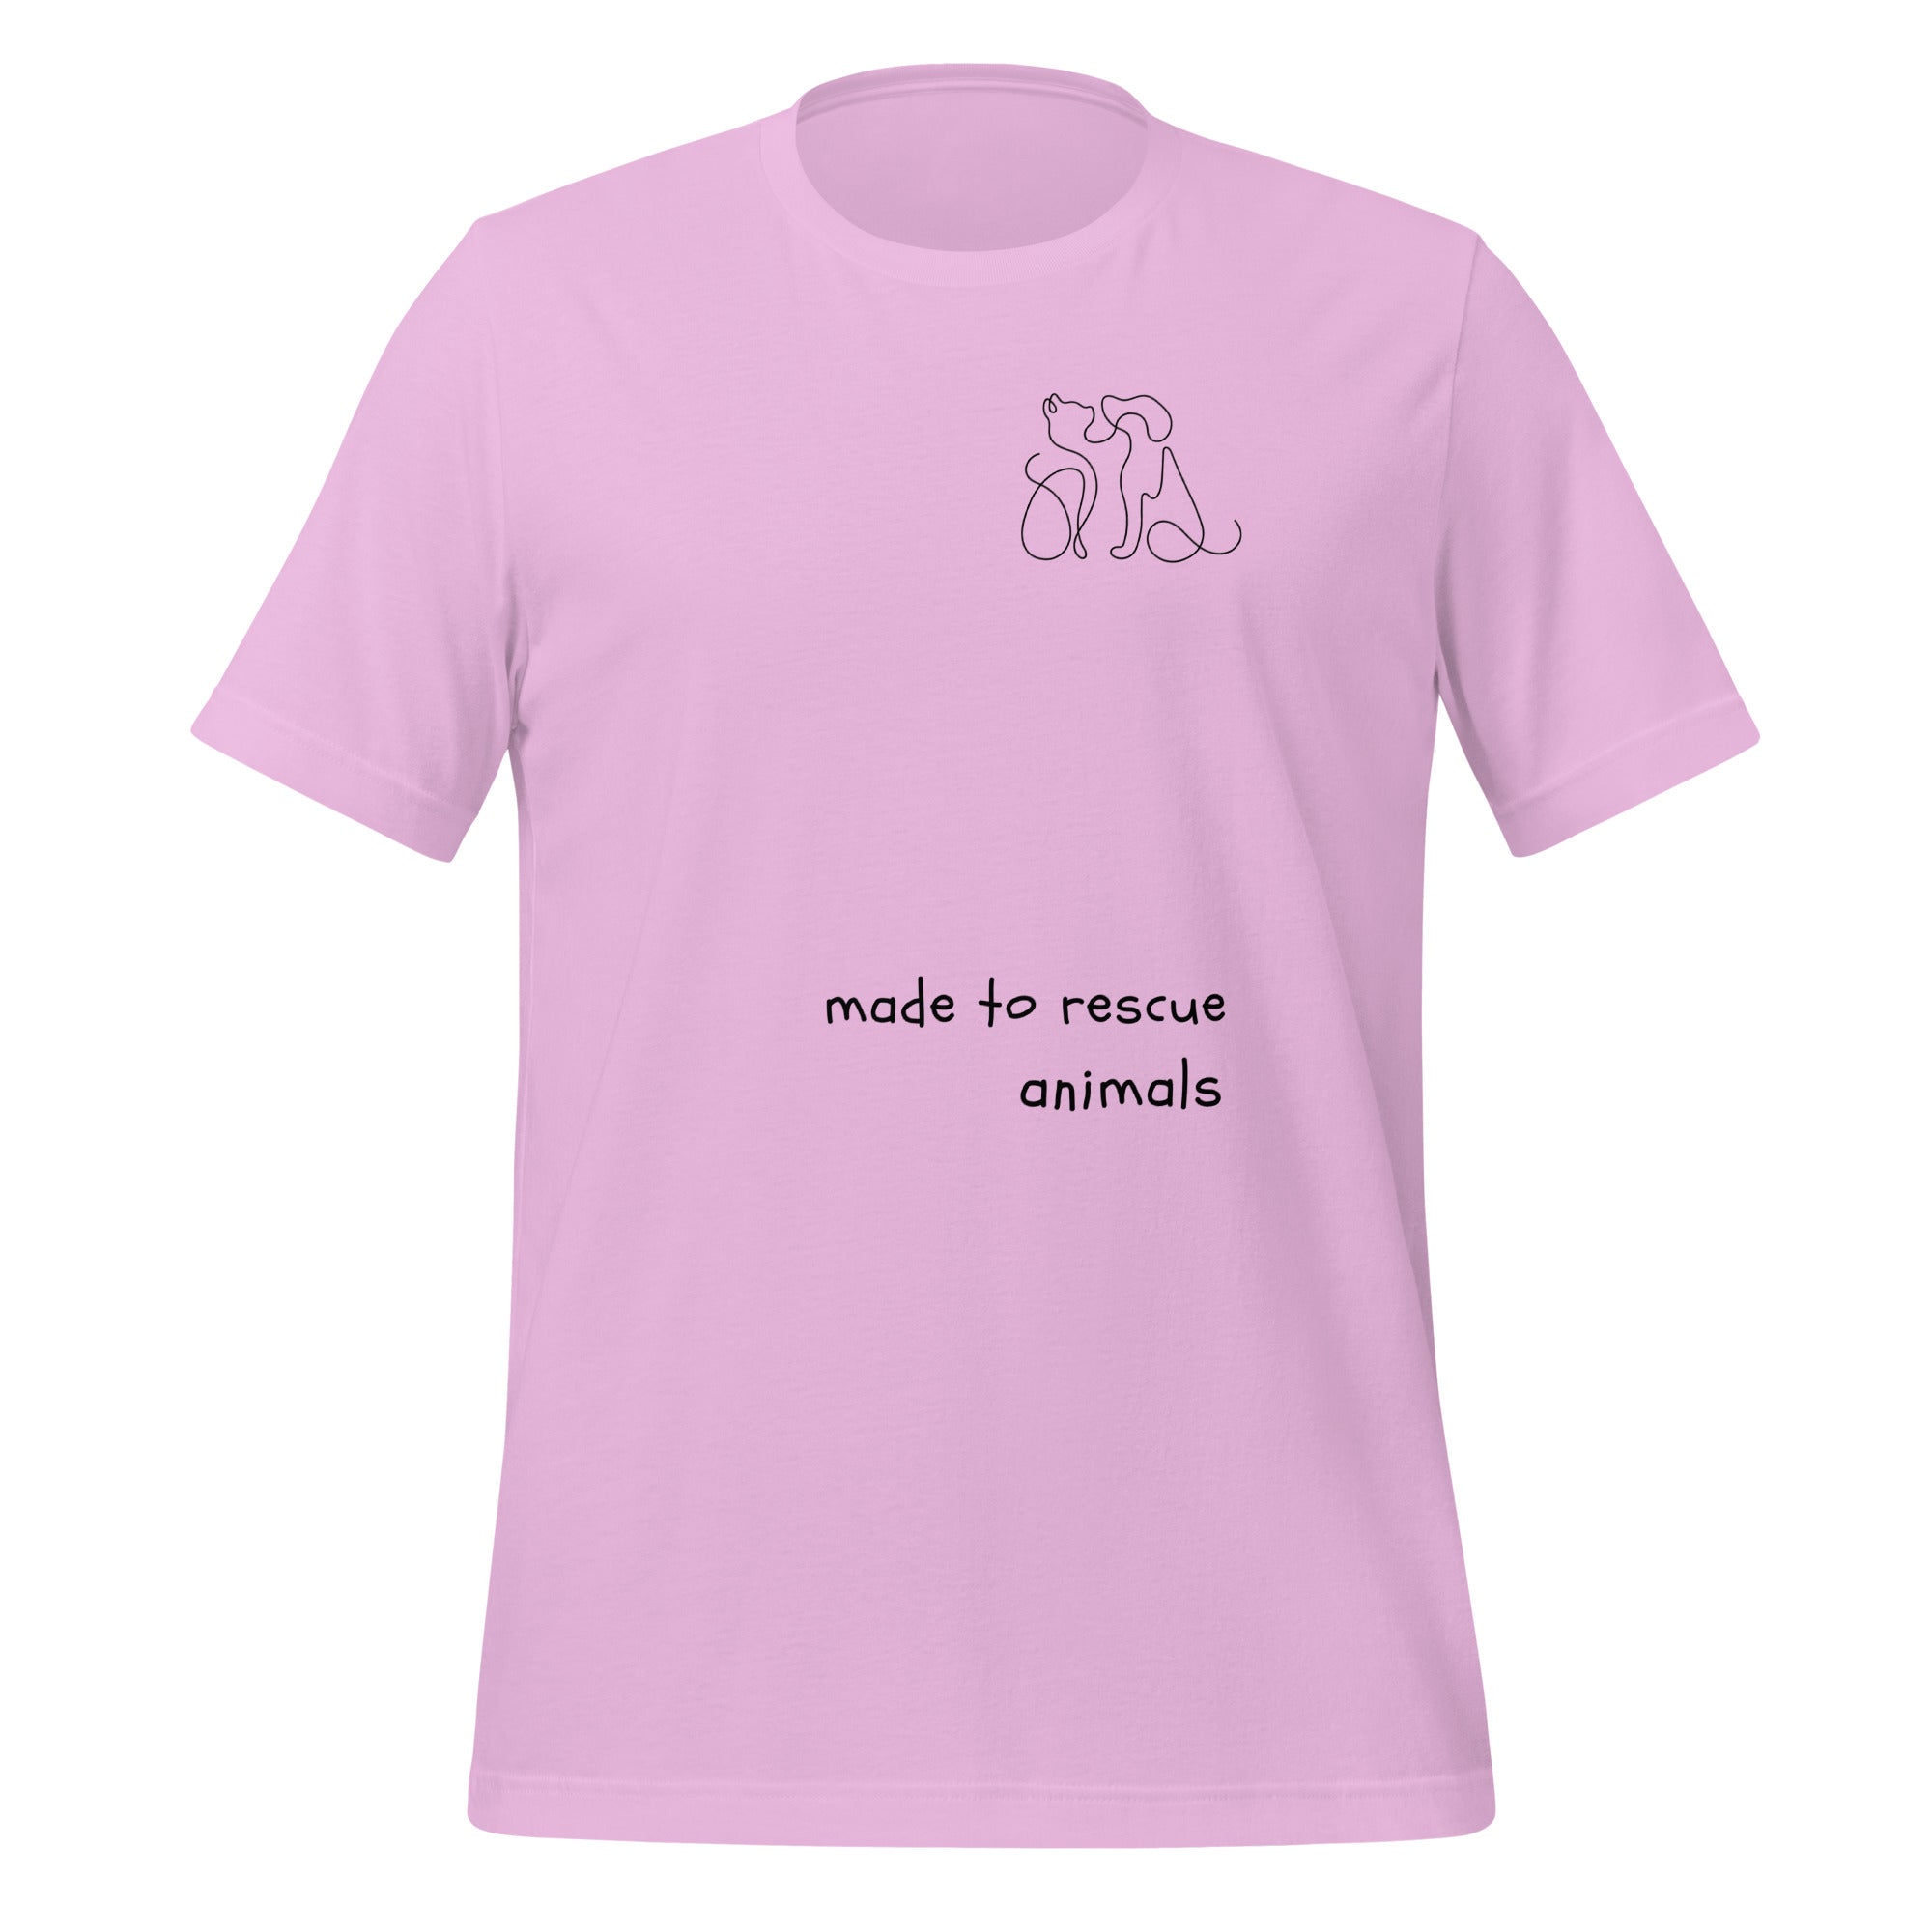 Made to rescue animals Unisex t-shirt